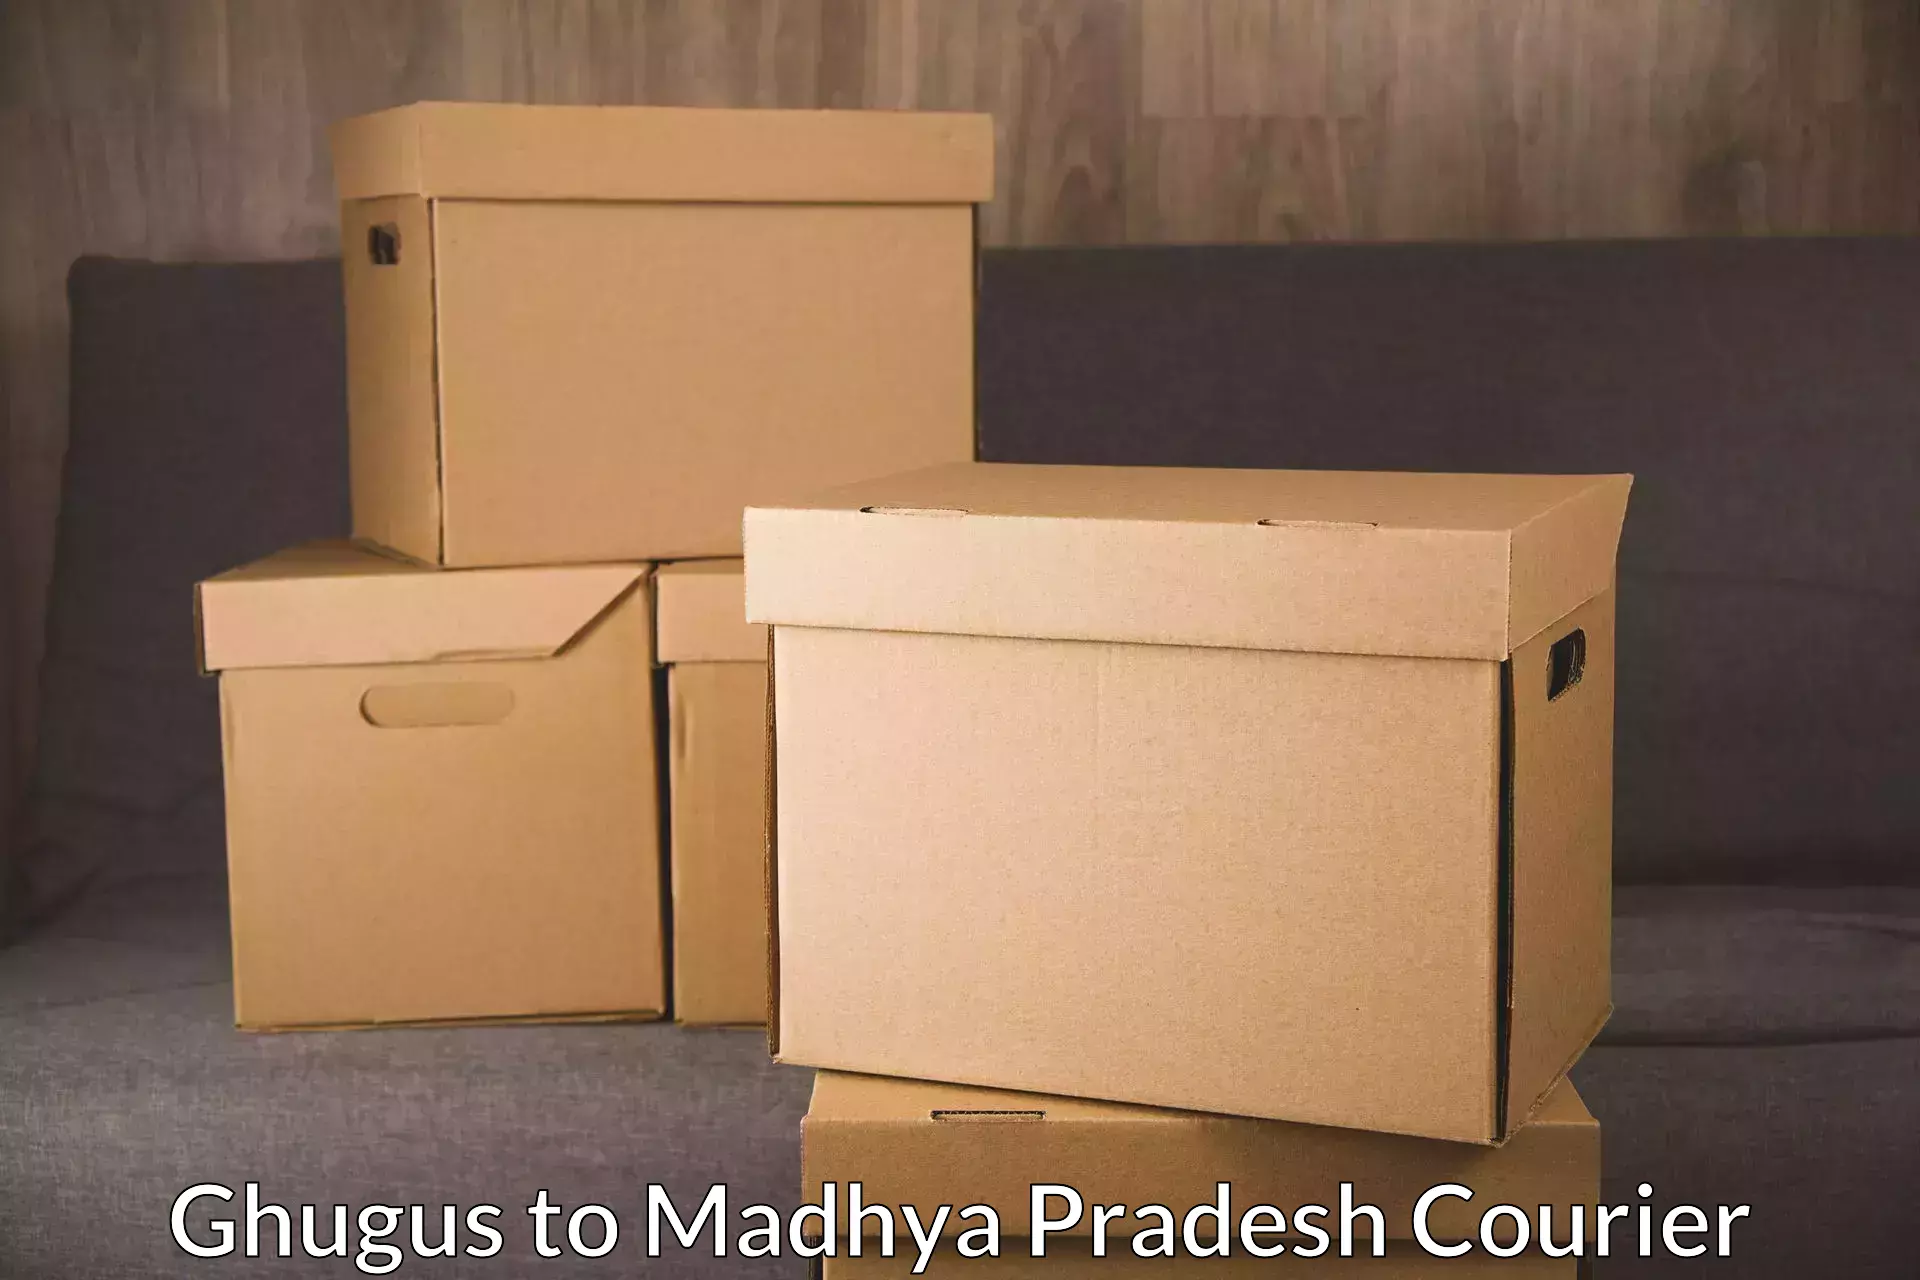 Multi-national courier services Ghugus to Madhya Pradesh